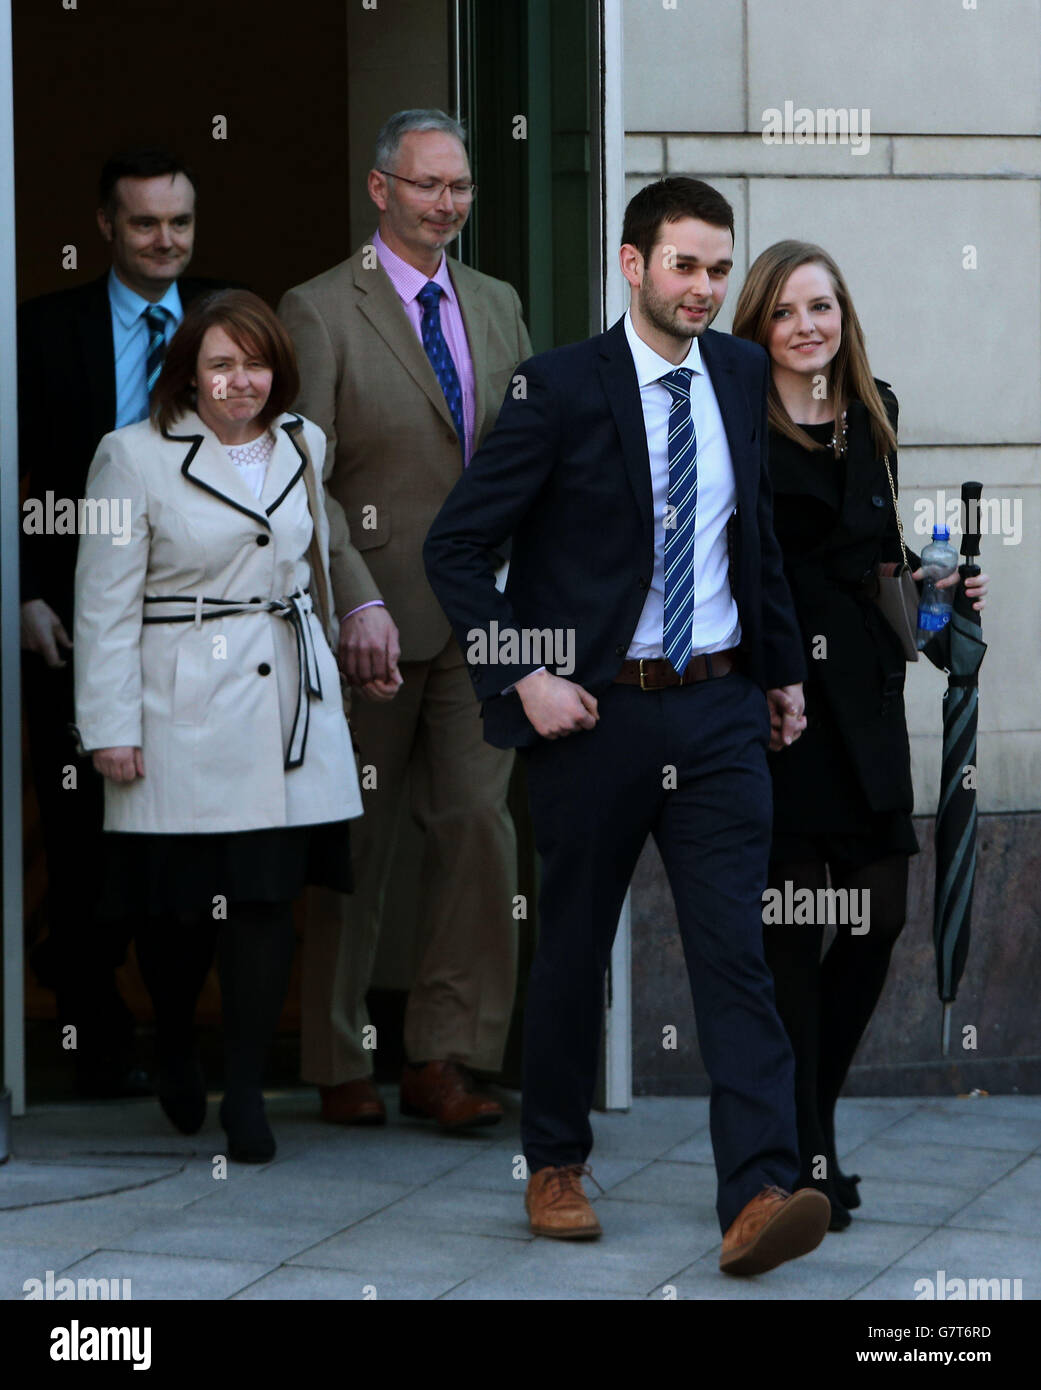 Daniel and Amy McArthur followed by founders of Ashers bakery and Mr. McArthur's parents, Colin (third left) and Karen McArthur, leave Belfast County Court, where Northern Ireland's Equality Commission is supporting a legal action against family-run Christian bakery, Ashers Bakery, on behalf of gay rights activist Gareth Lee, whose order of a cake with an image of Sesame Street puppets Bert and Ernie below the motto 'Support Gay Marriage' was declined. Stock Photo